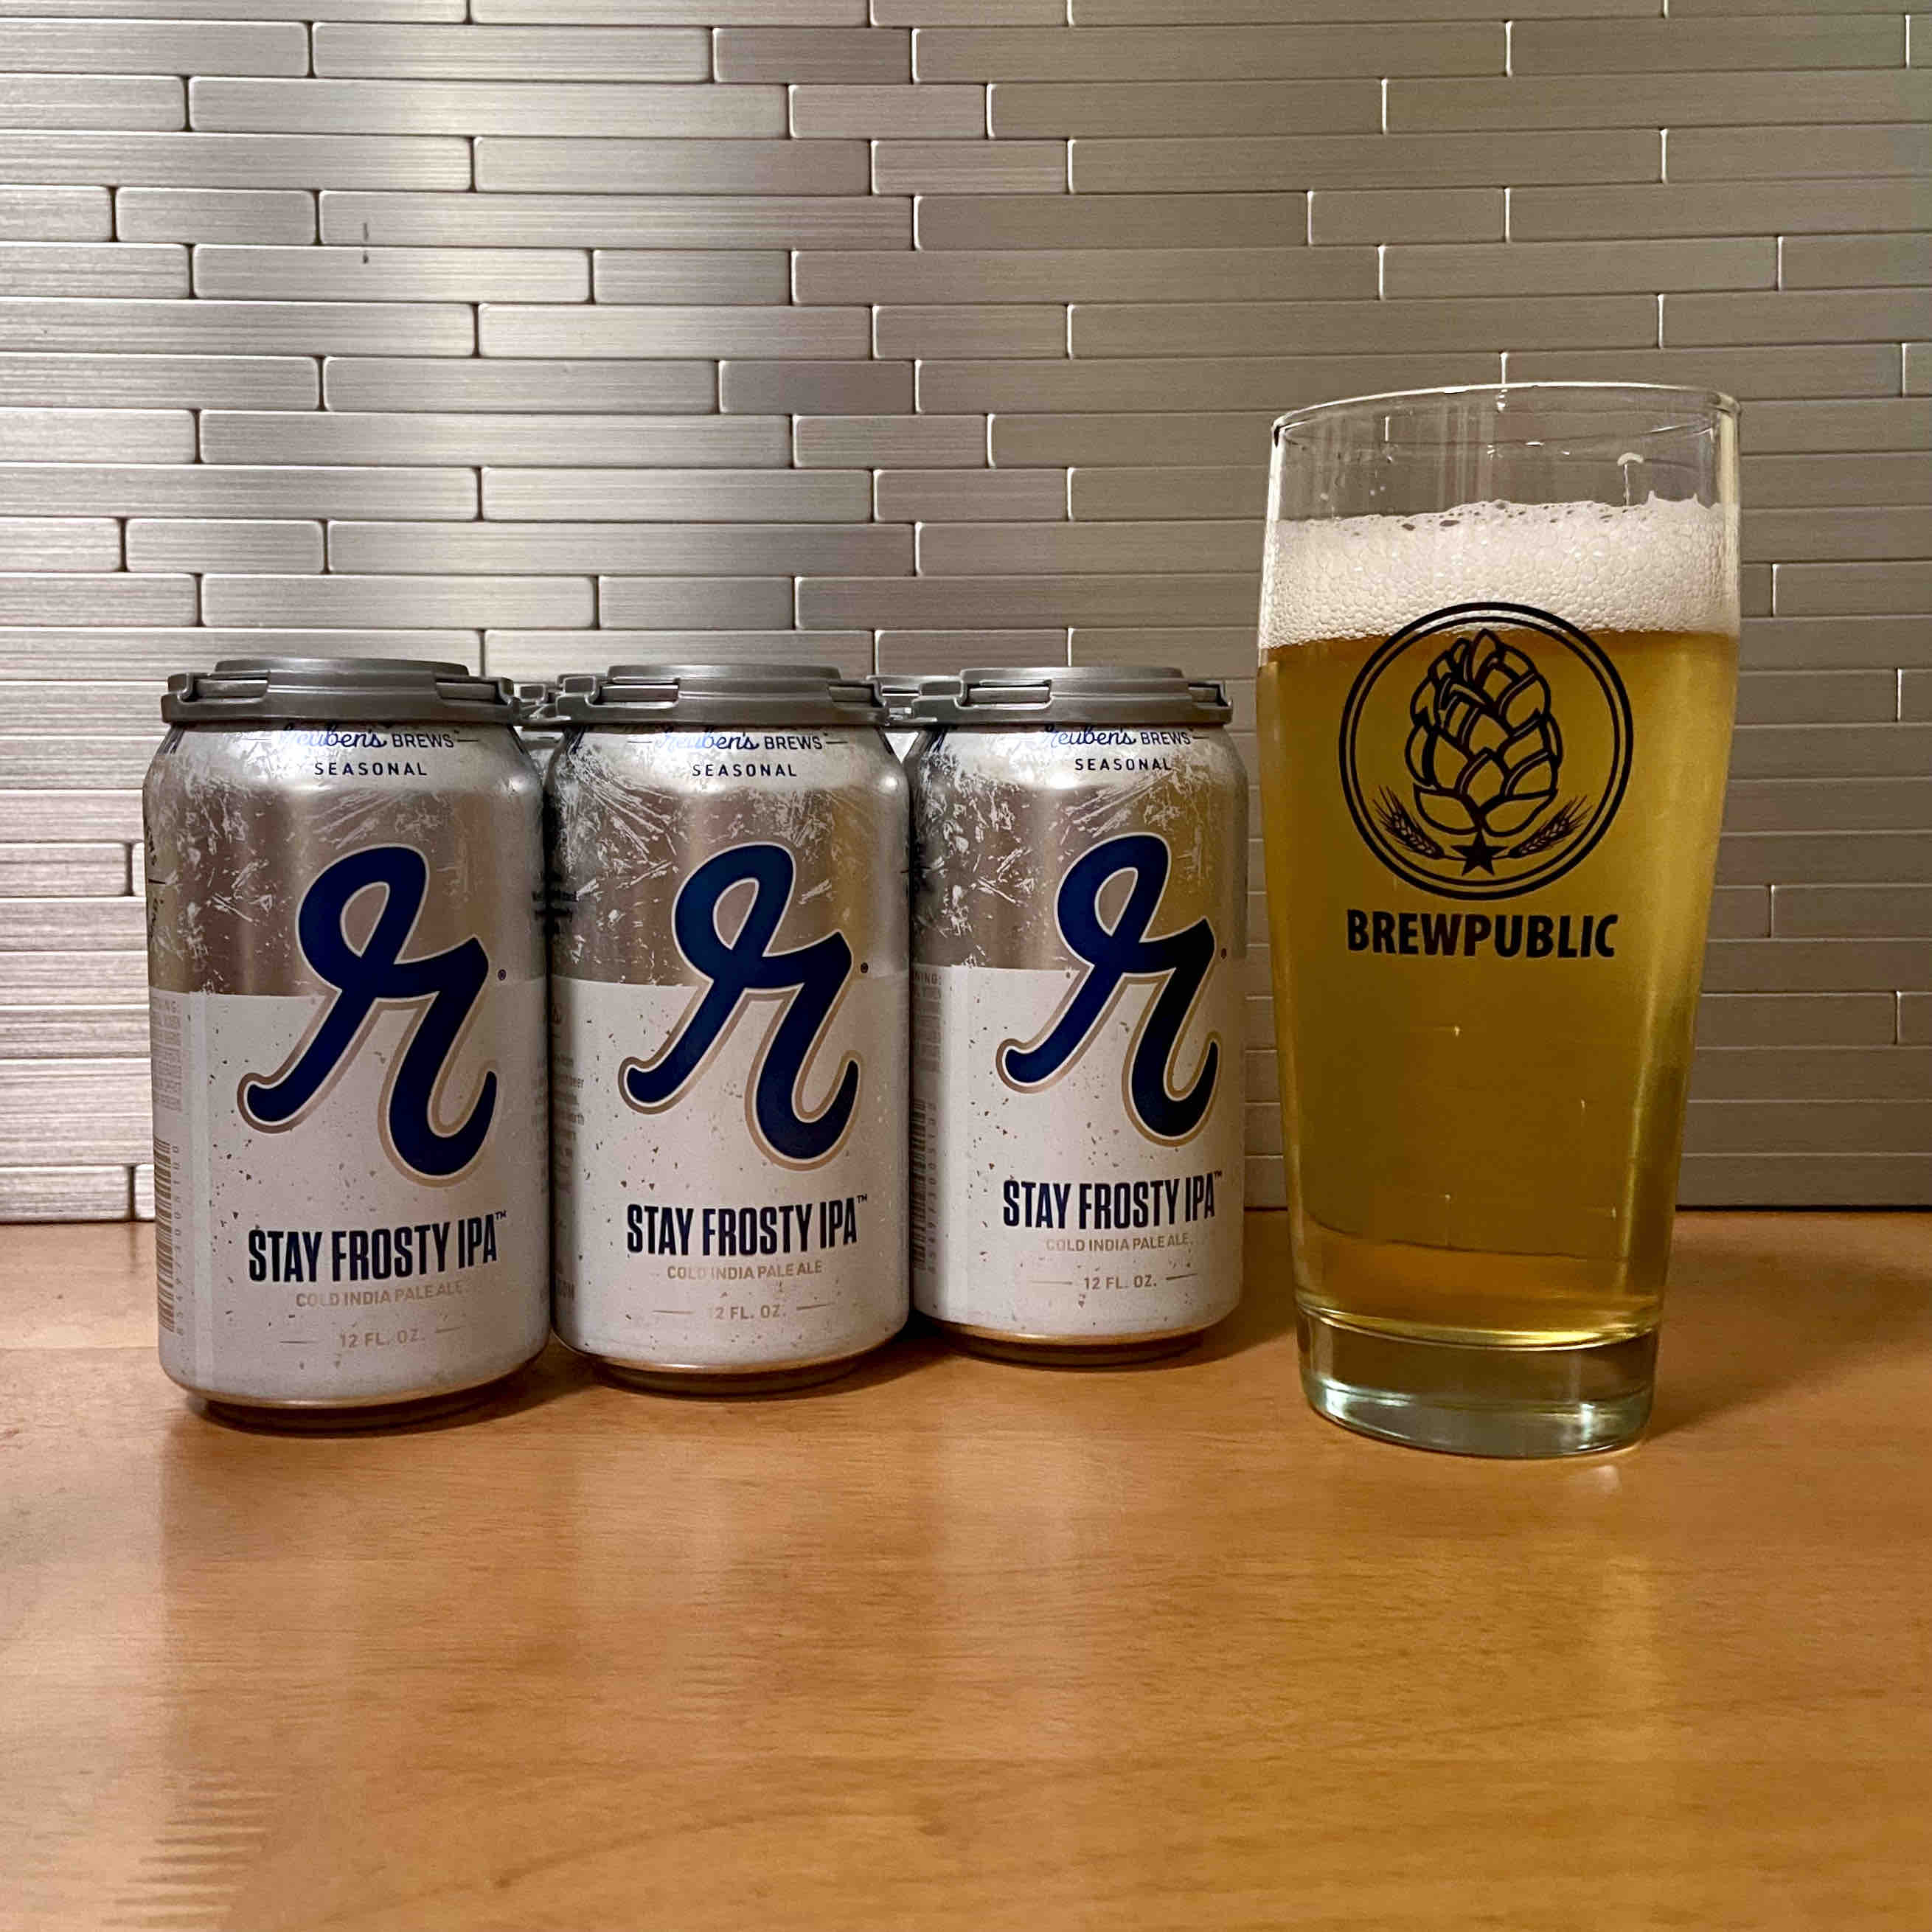 Stay Frosty IPA, a new Cold IPA, is the latest seasonal offering from Reuben's Brews.